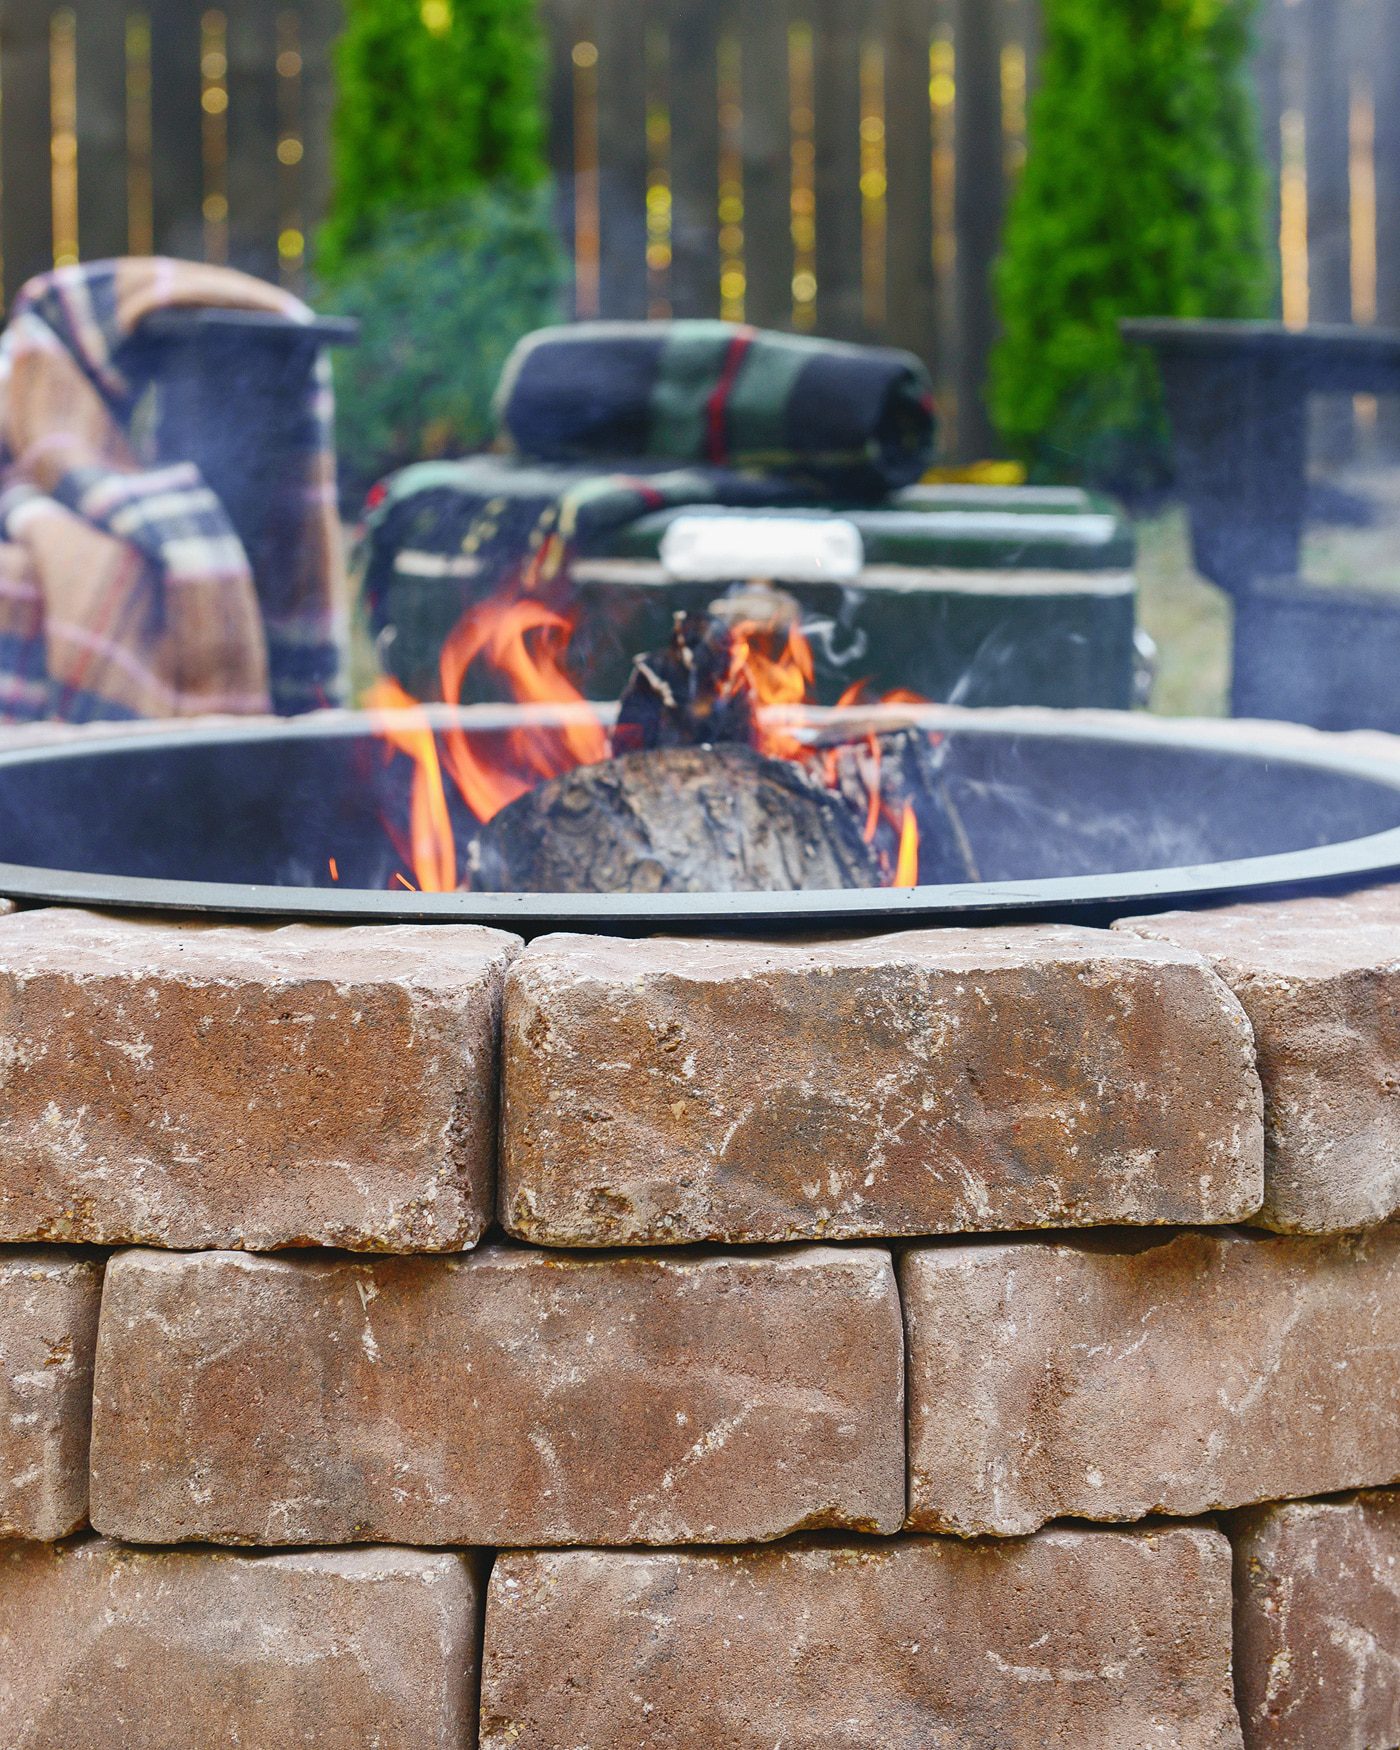 How to make a fire pit // DIY fire pit // via Yellow Brick Home